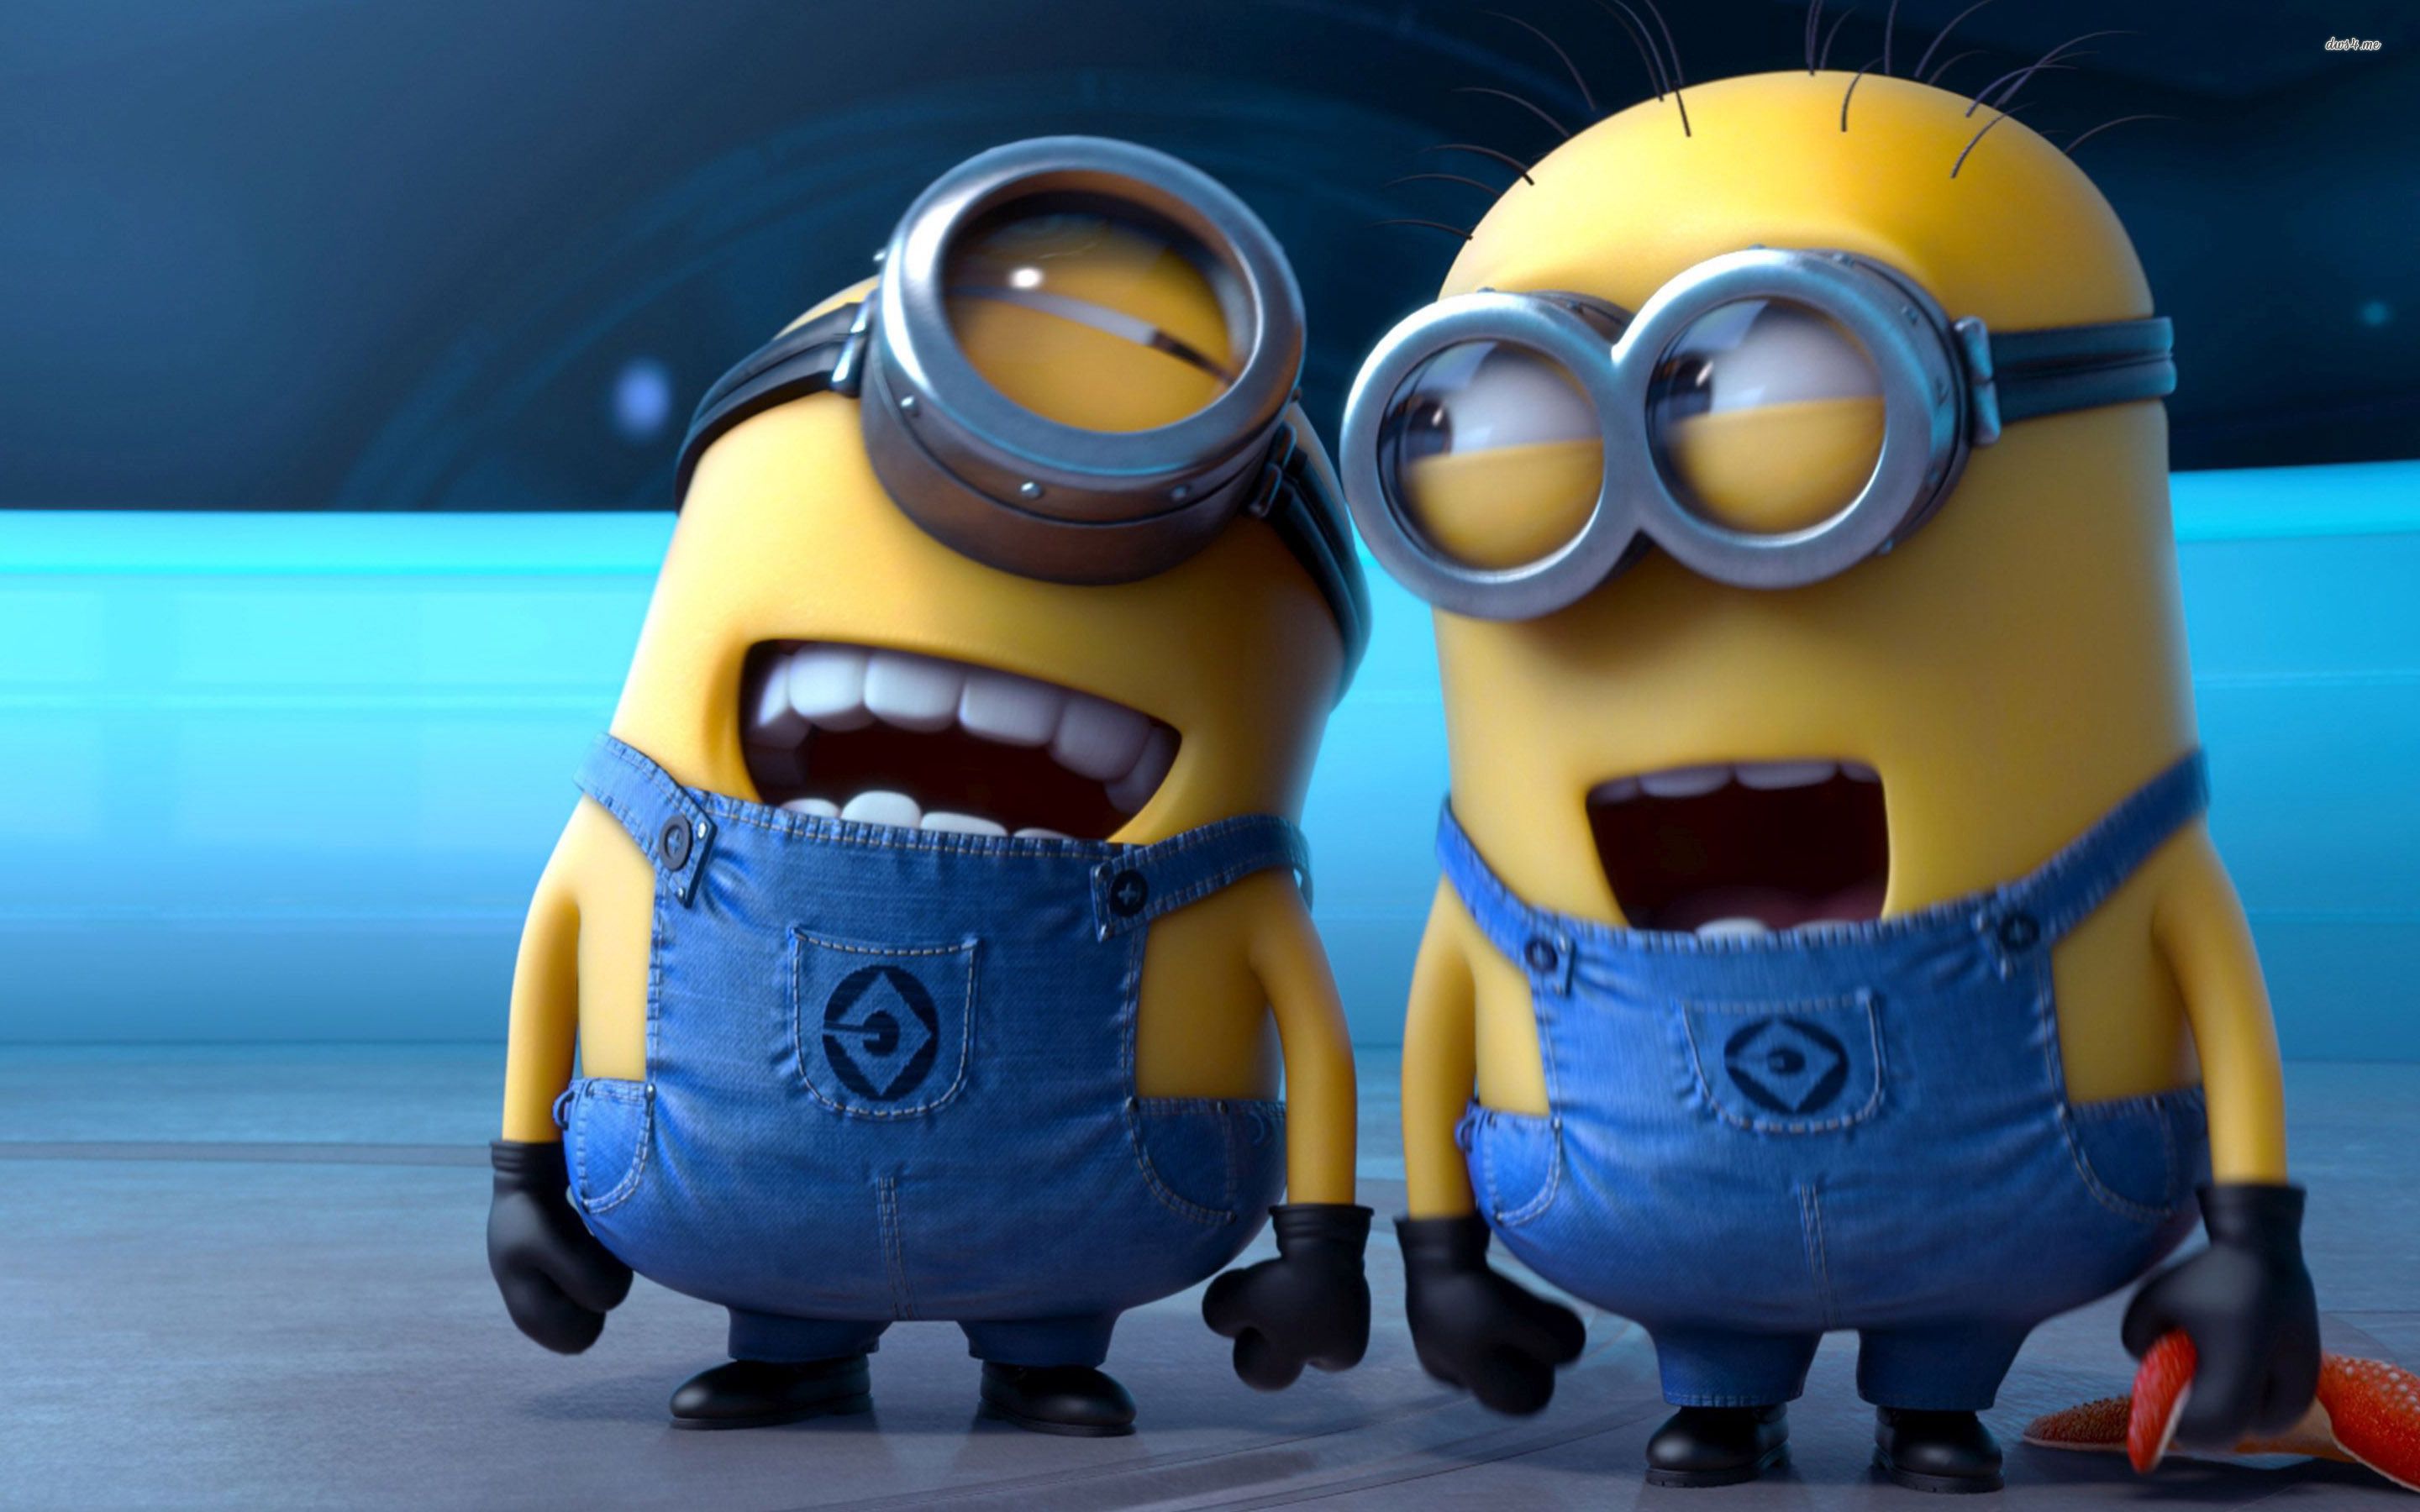 Despicable Me 2 Laughing Minions wallpaper - Cartoon wallpapers ...